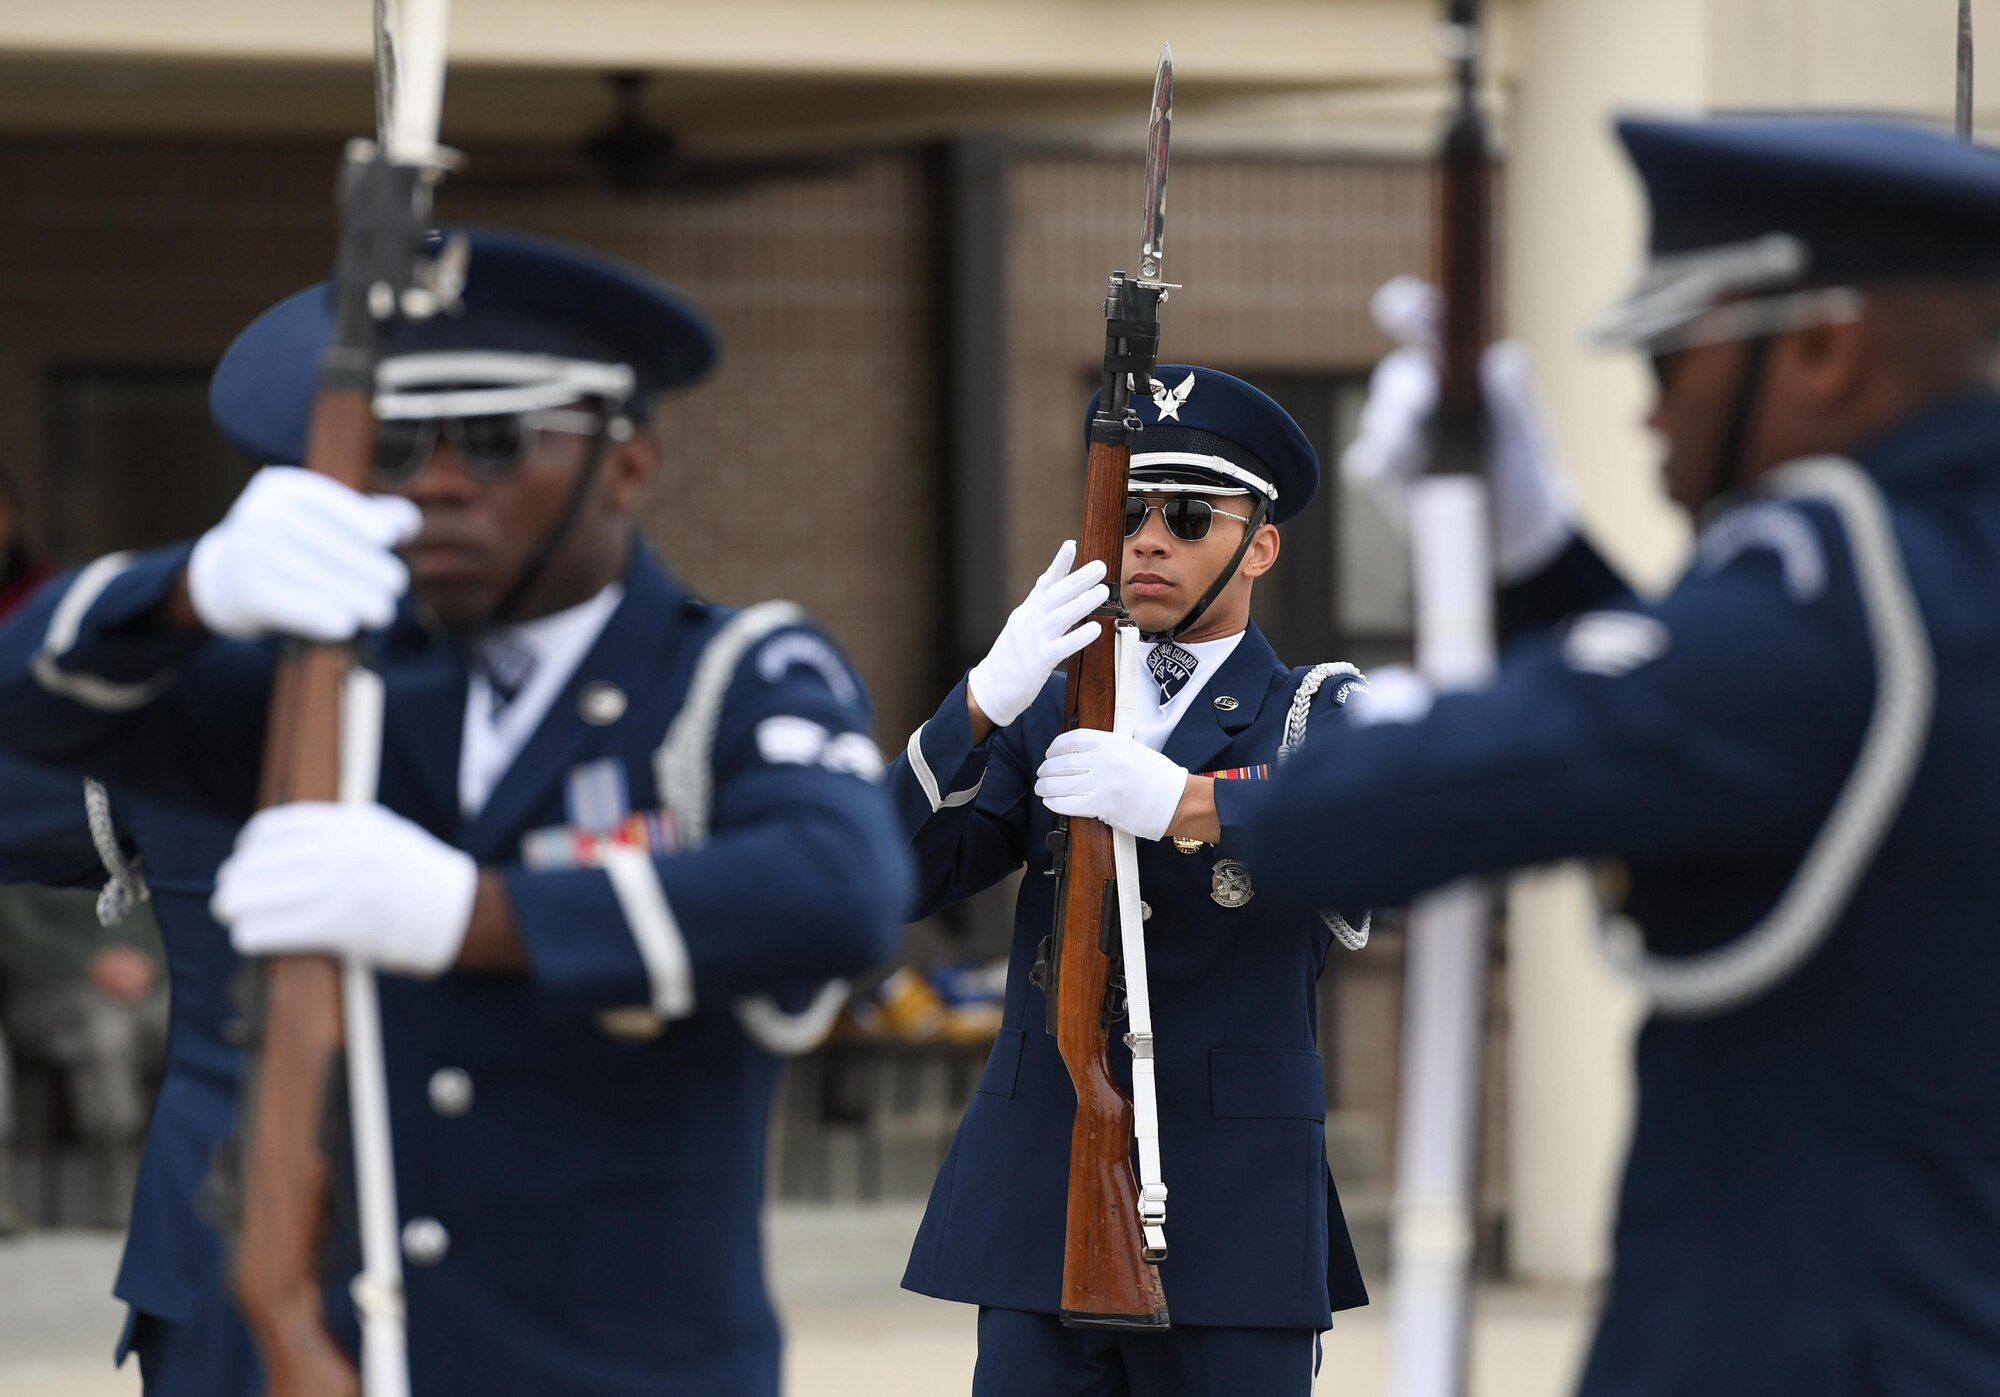 U.S. Air Force Senior Airman Bryan Satterlee, U.S. Air Force Honor Guard Drill Team member, participates in the debut performance of the team's 2019 routine in front of Keesler leadership and 81st Training Group Airmen on the Levitow Training Support Facility drill pad at Keesler Air Force Base, Mississippi, Feb. 8, 2019. The team comes to Keesler every year for five weeks to develop a new routine that they will use throughout the year. (U.S. Air Force photo by Kemberly Groue)